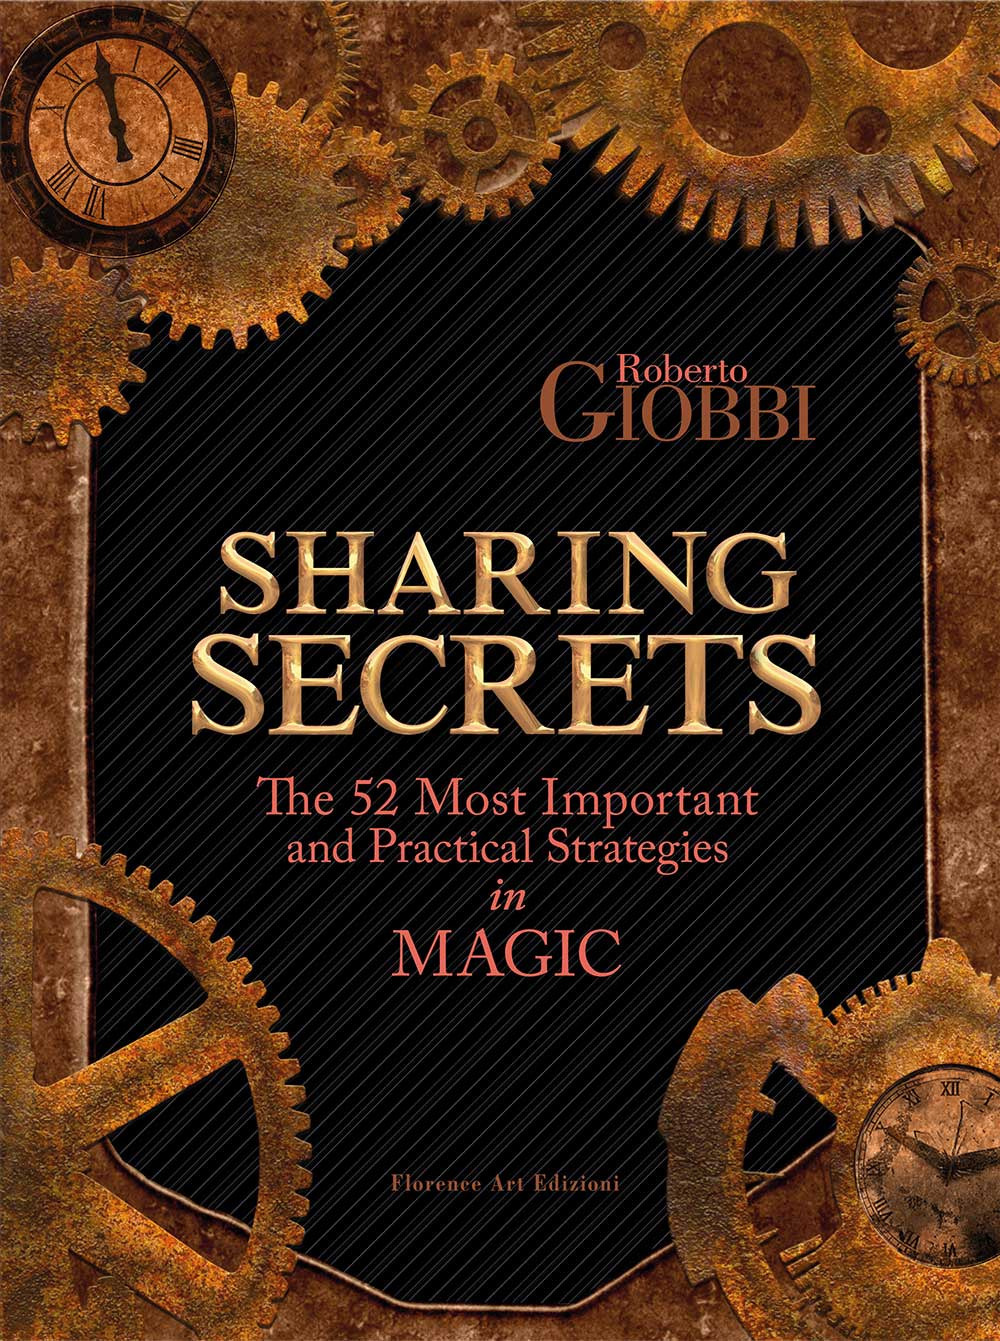 Sharing Secrets. The Most Important and Practical Strategies in Magic